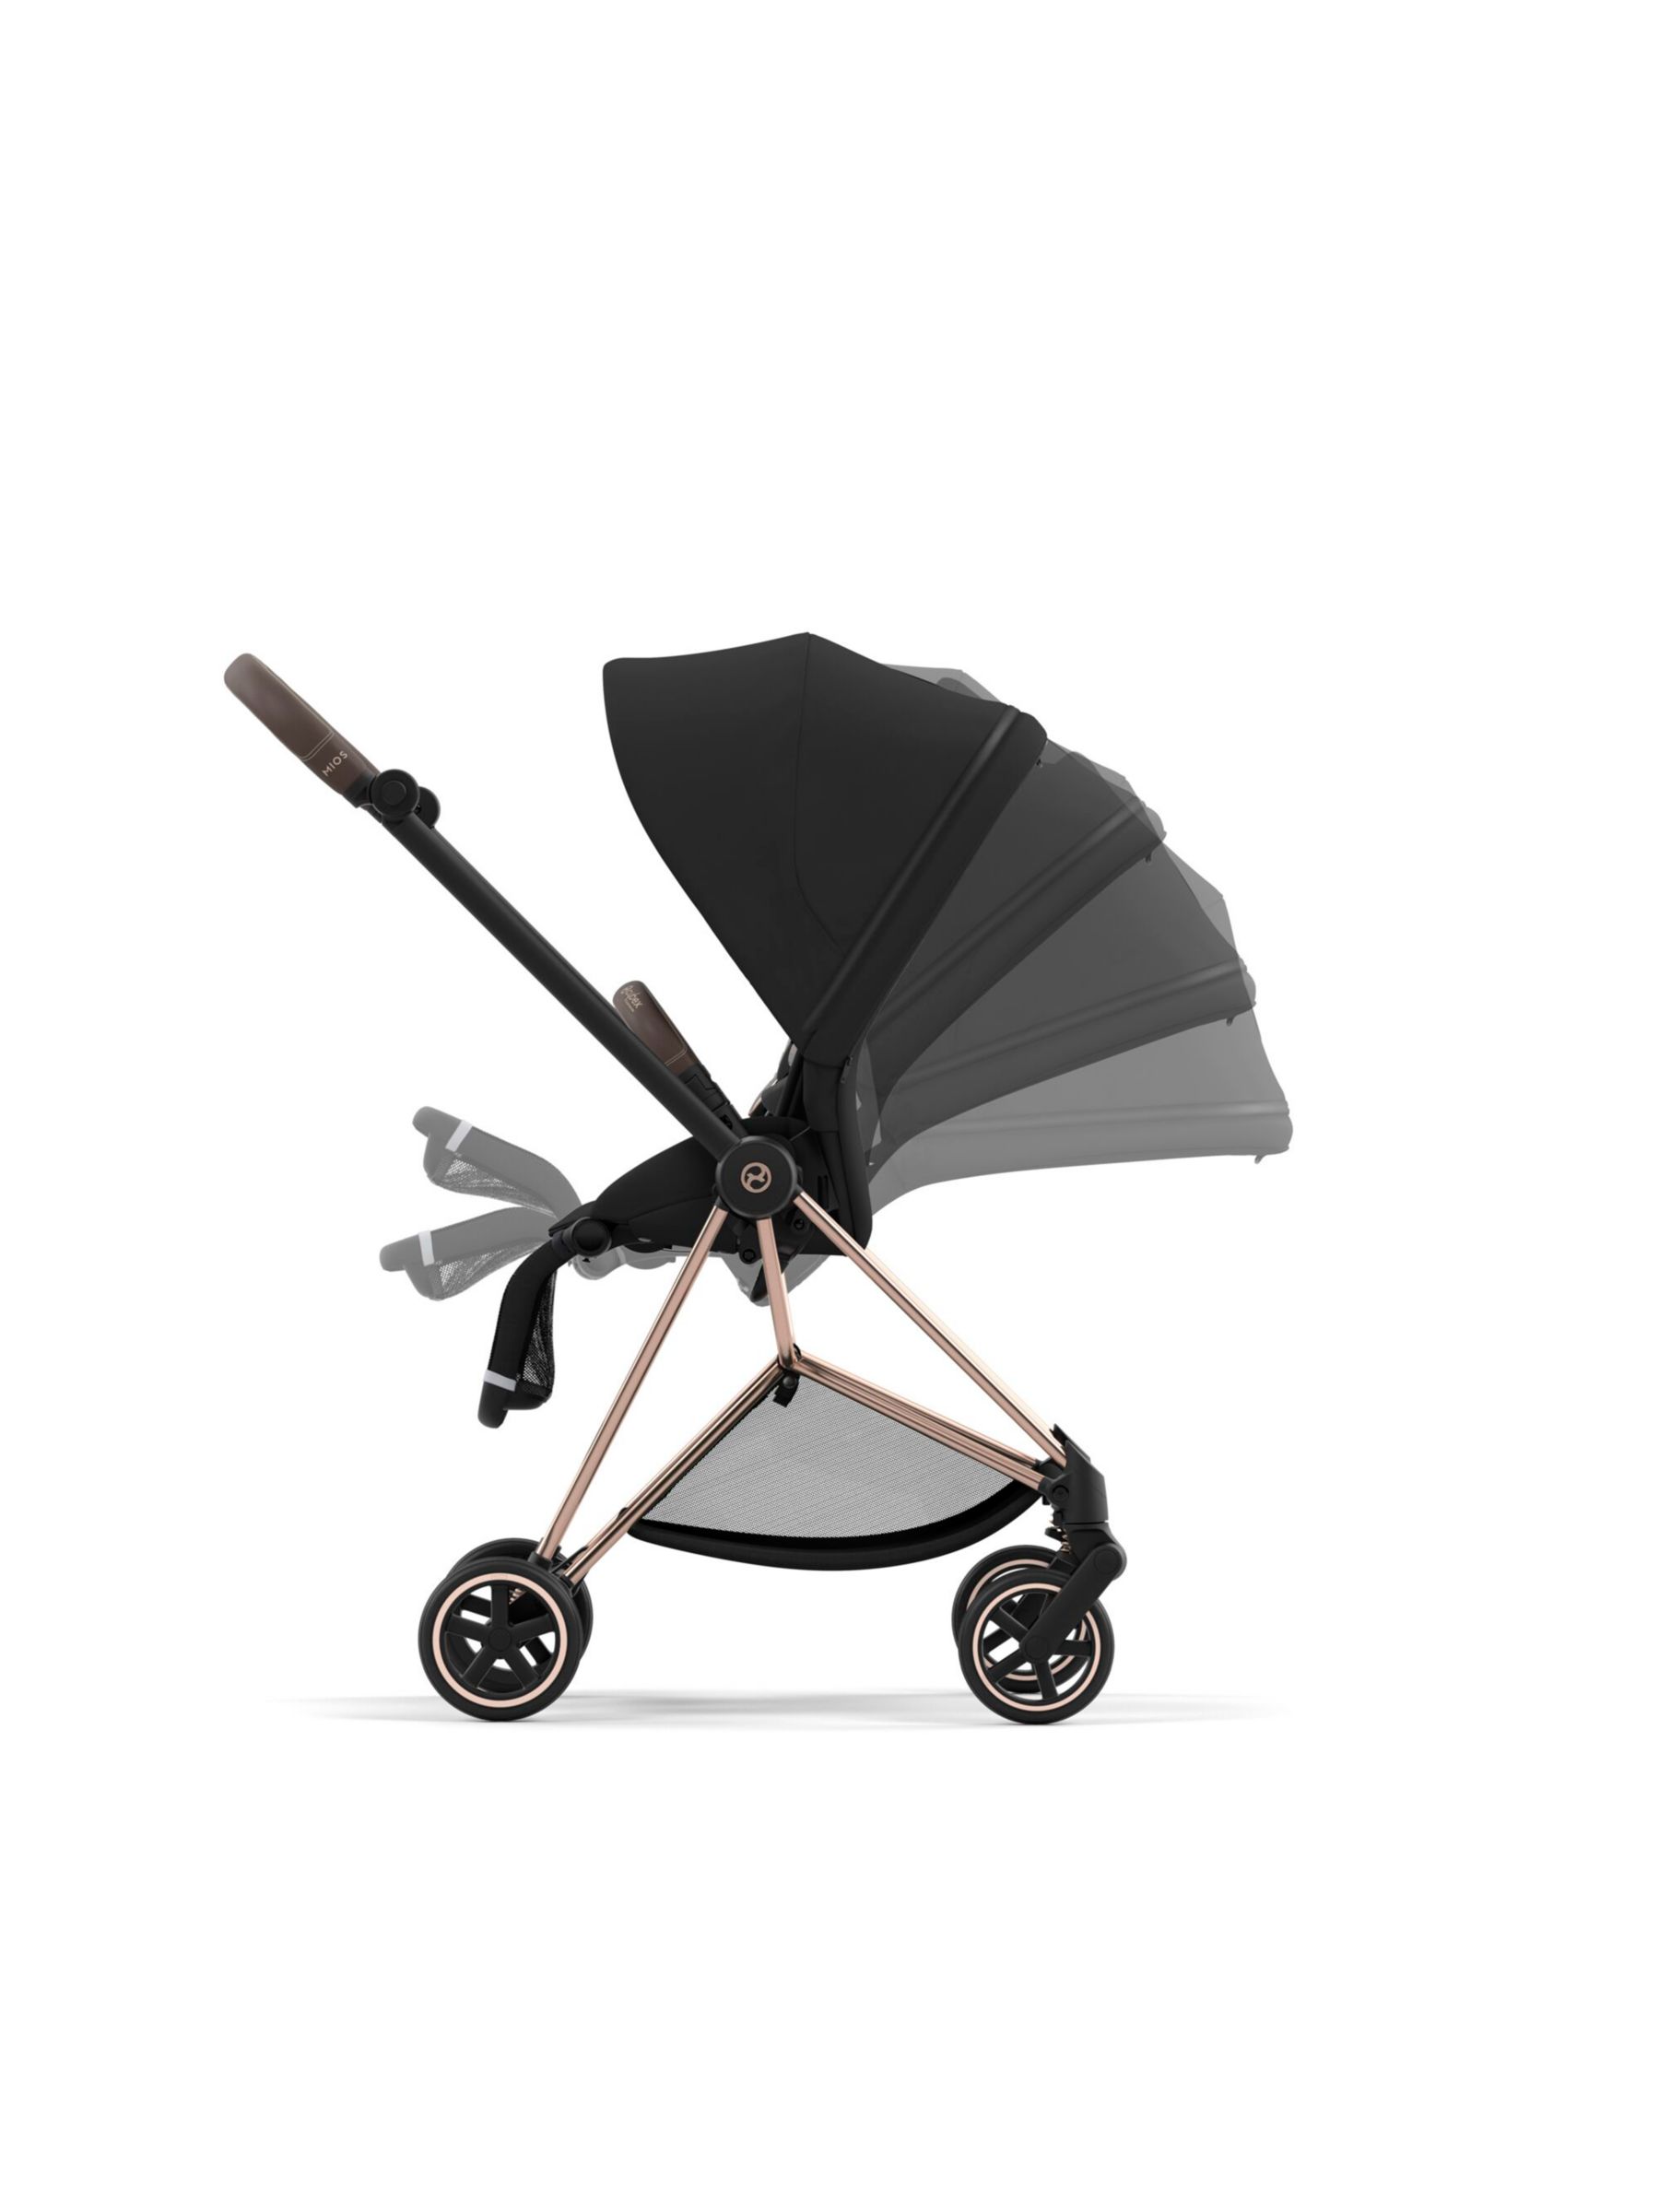 Cybex Mios Pushchair Chassis & Seat Pack Bundle, Rose Gold/ Matte Black